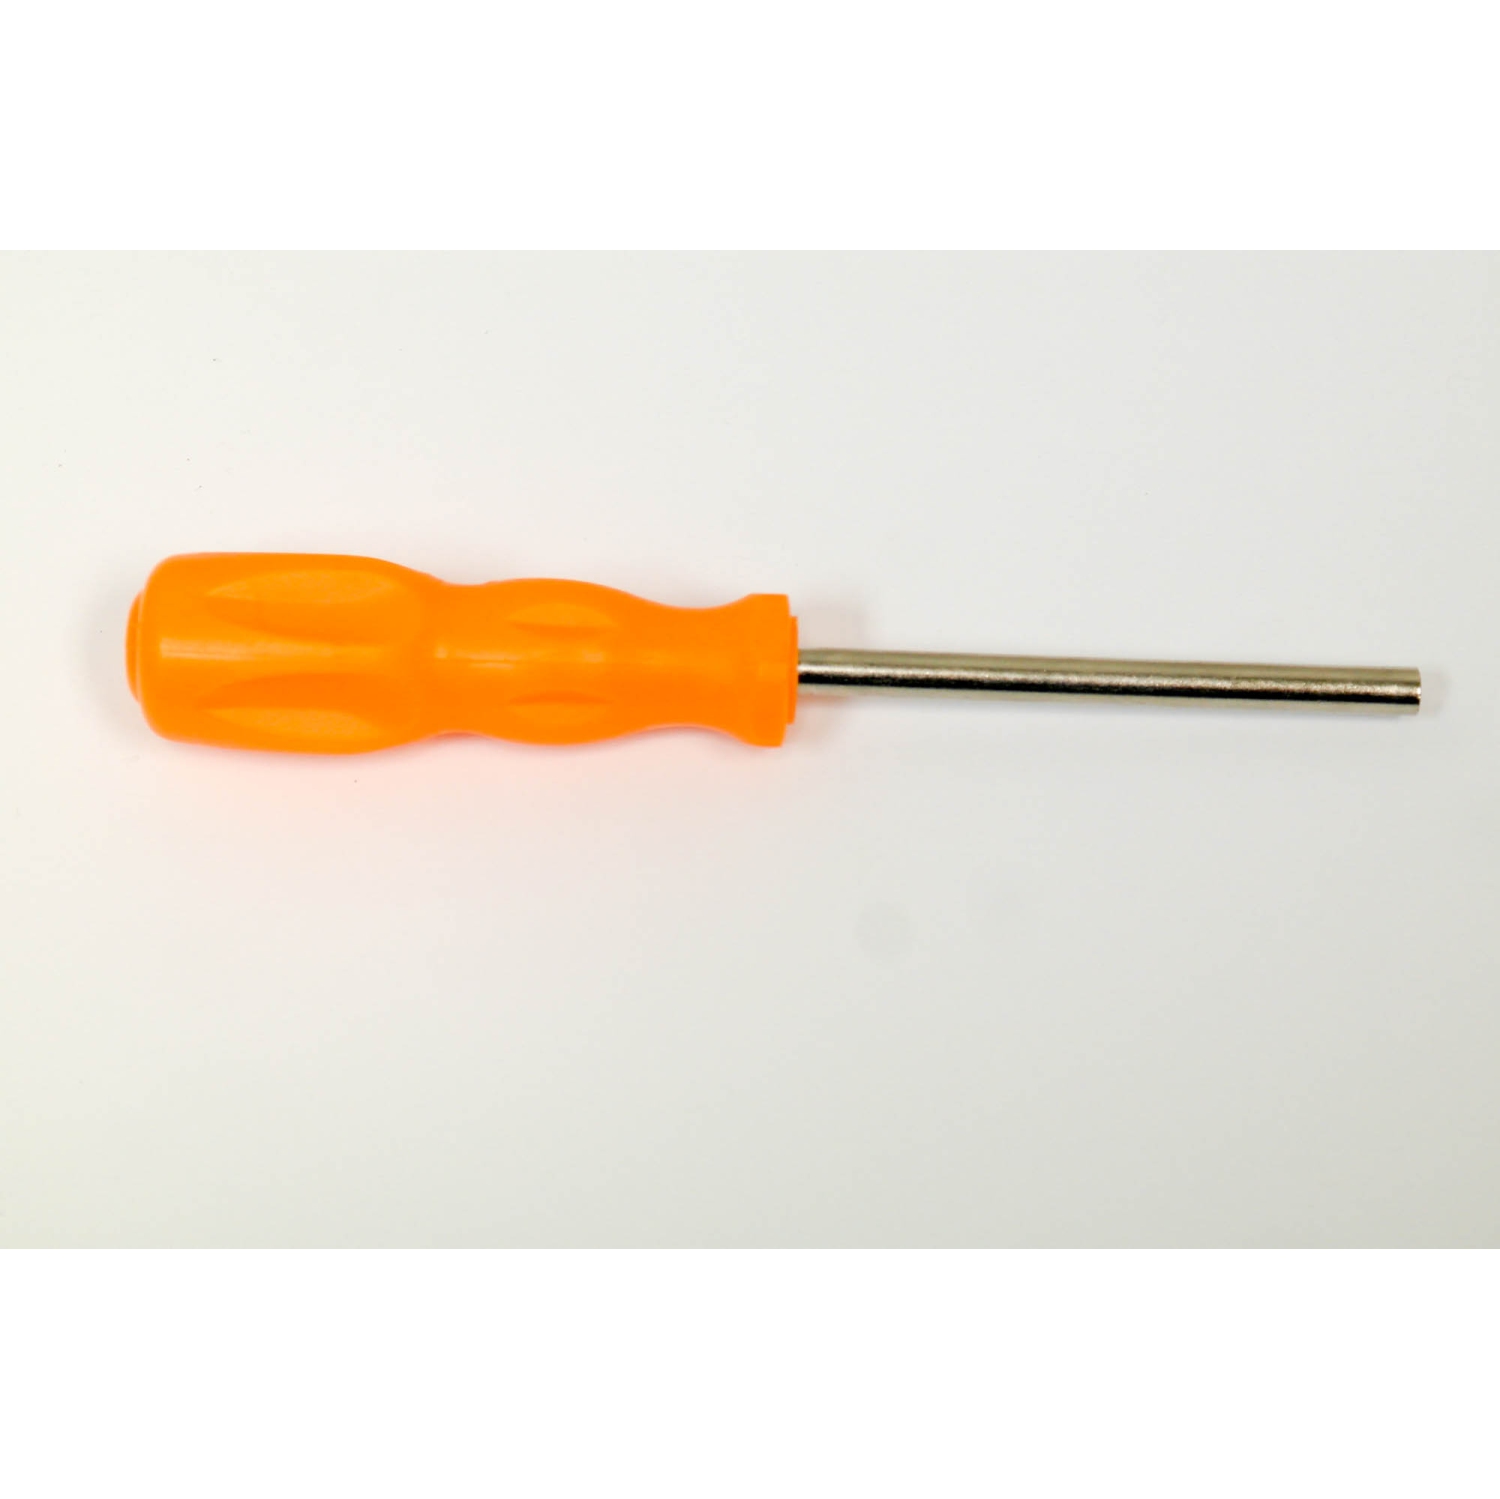 4.5 mm Screwdriver for Nintendo Sega and TurboGrafx Video Game Systems by Mars Devices